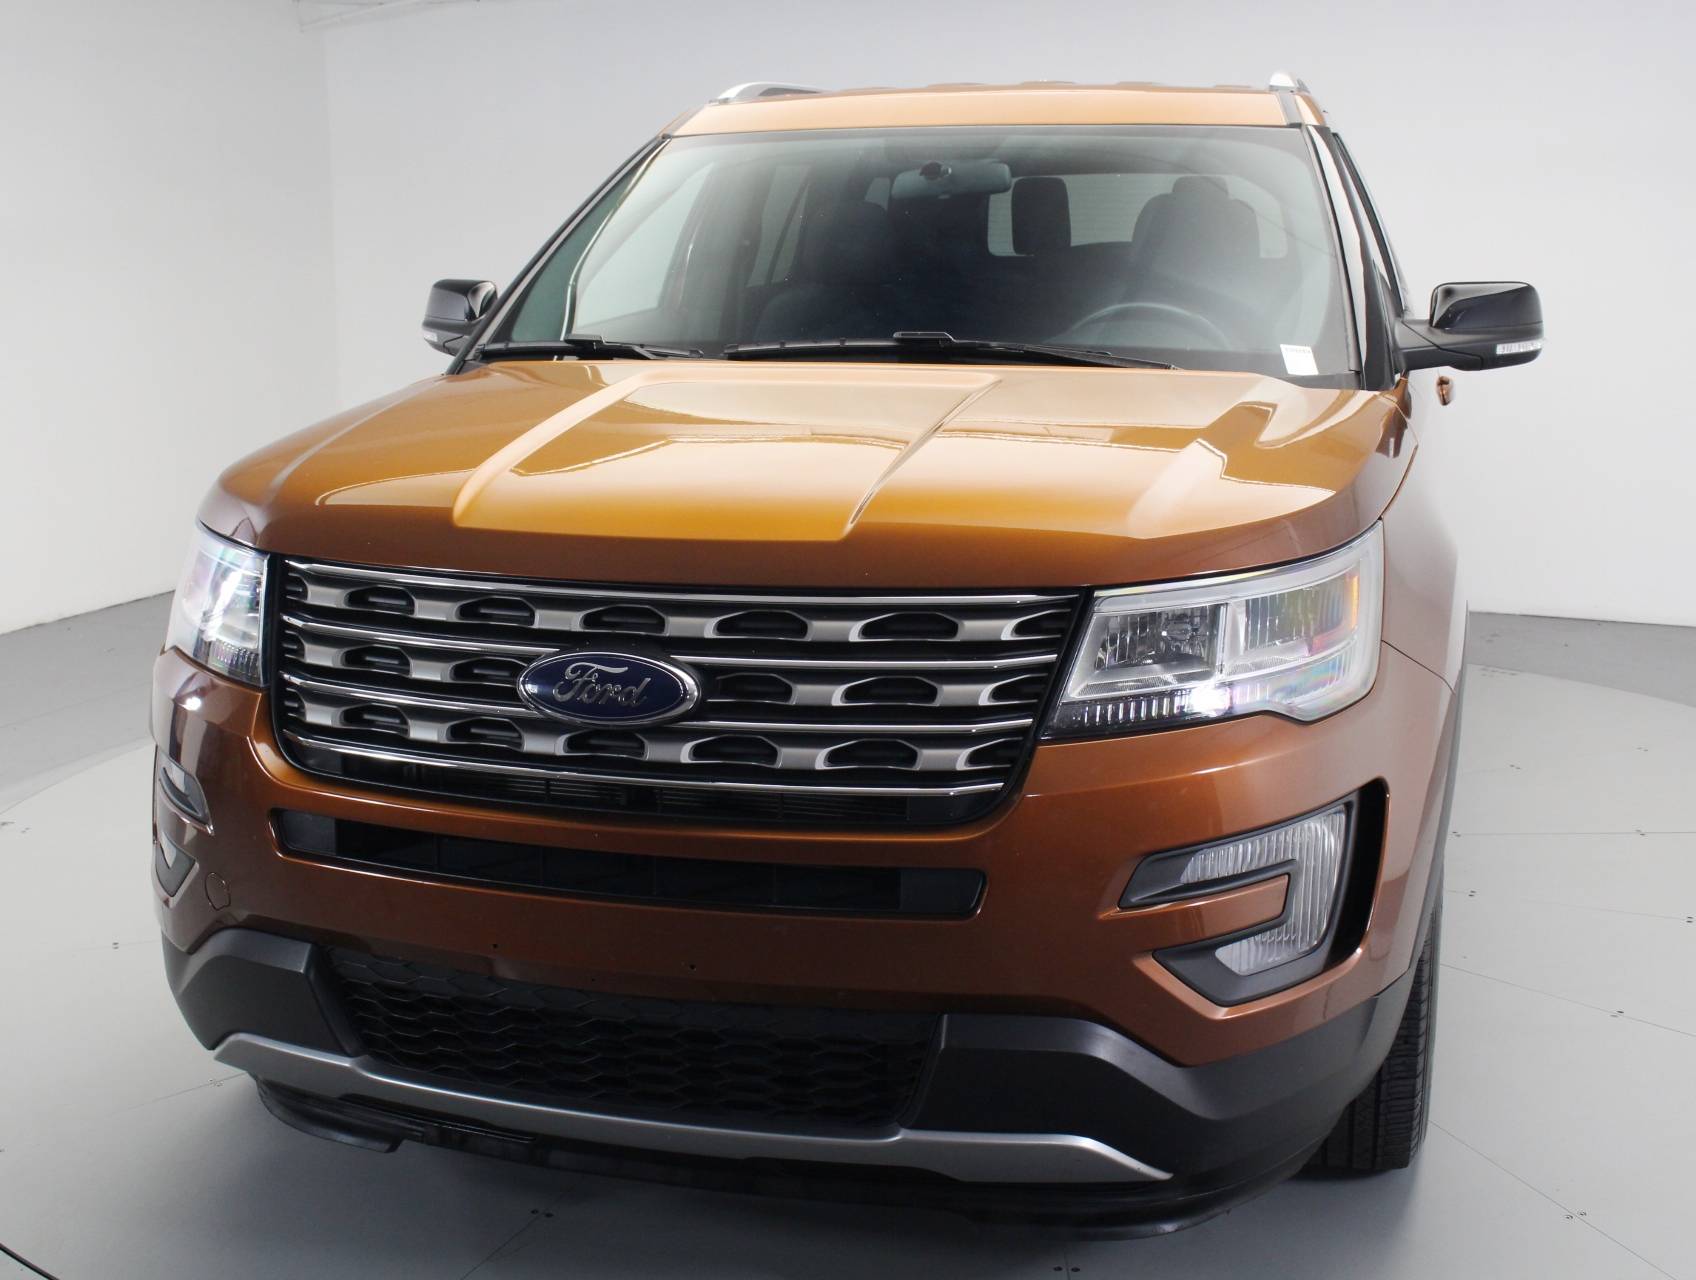 Florida Fine Cars - Used FORD EXPLORER 2017 WEST PALM Xlt 4x4